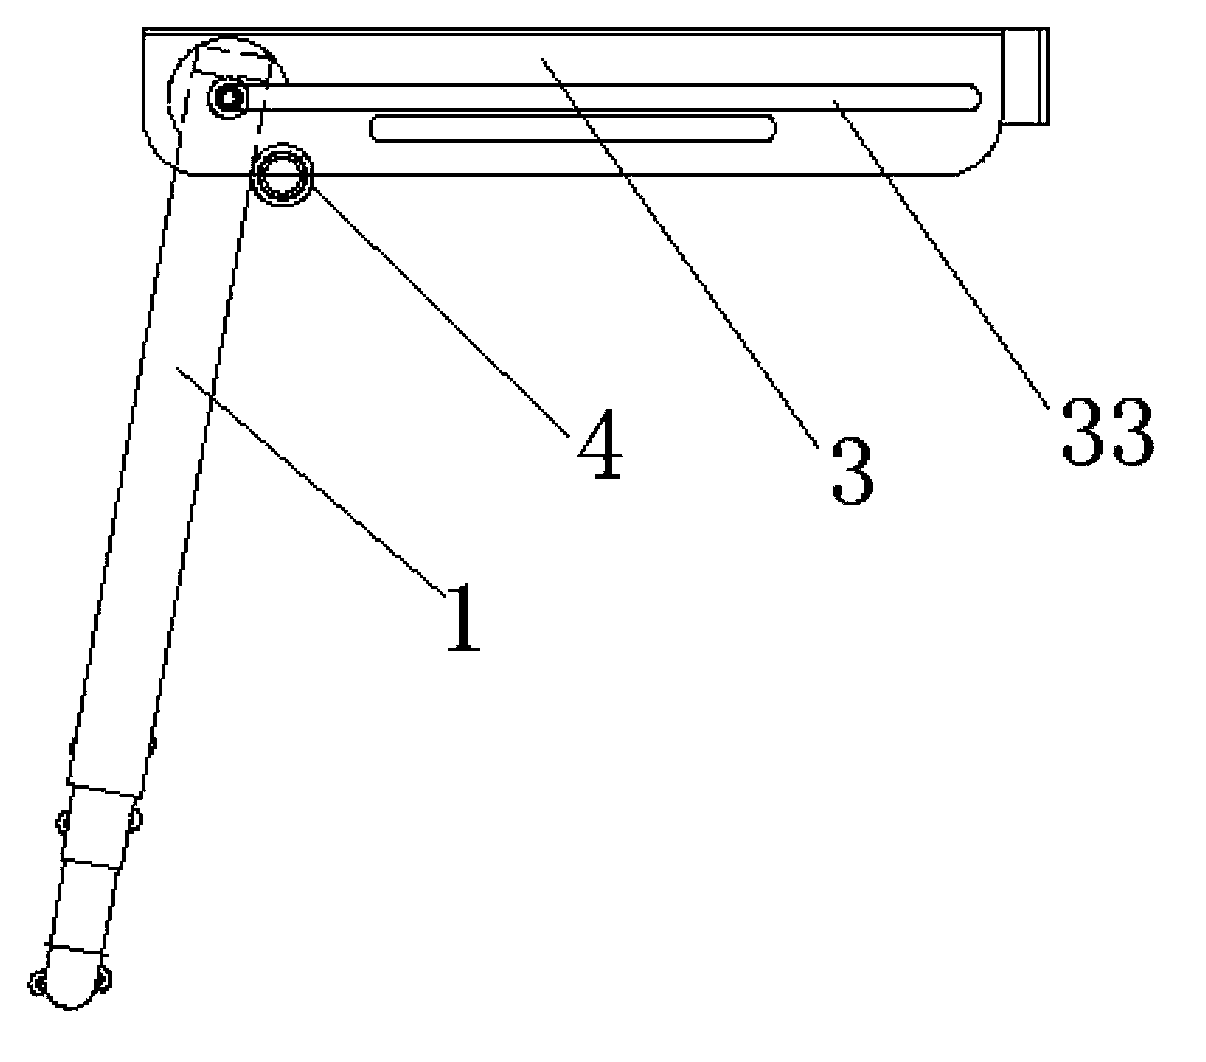 Automatically flexible self-locking ladder for ship